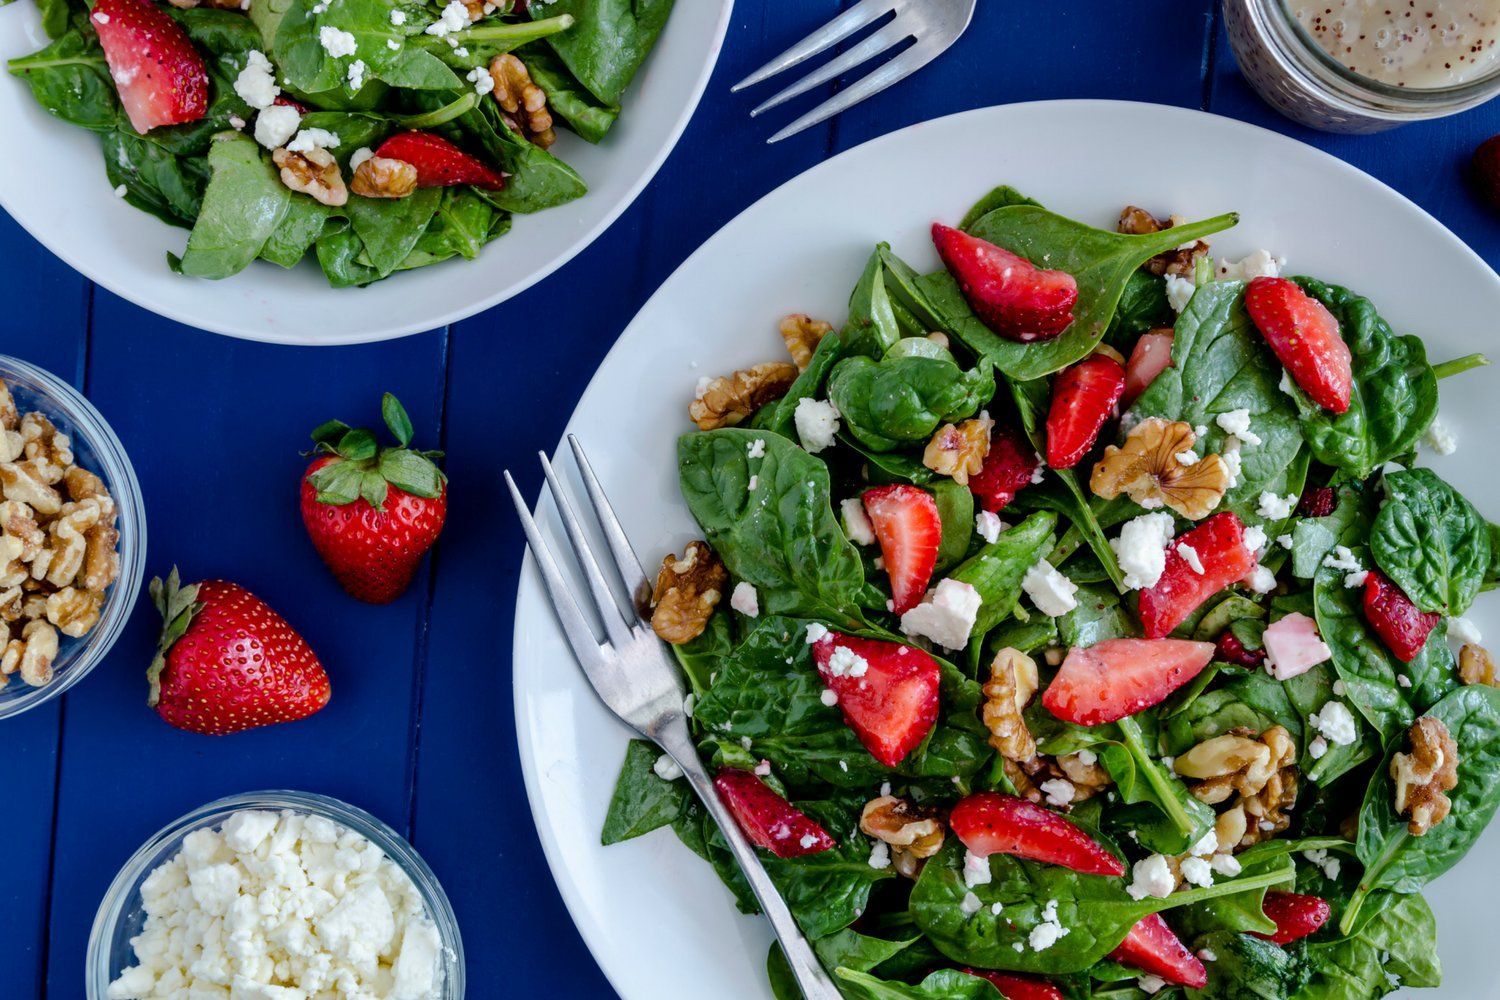 Strawberry spinach salad with poppyseed dressing, feta cheese, and walnuts.